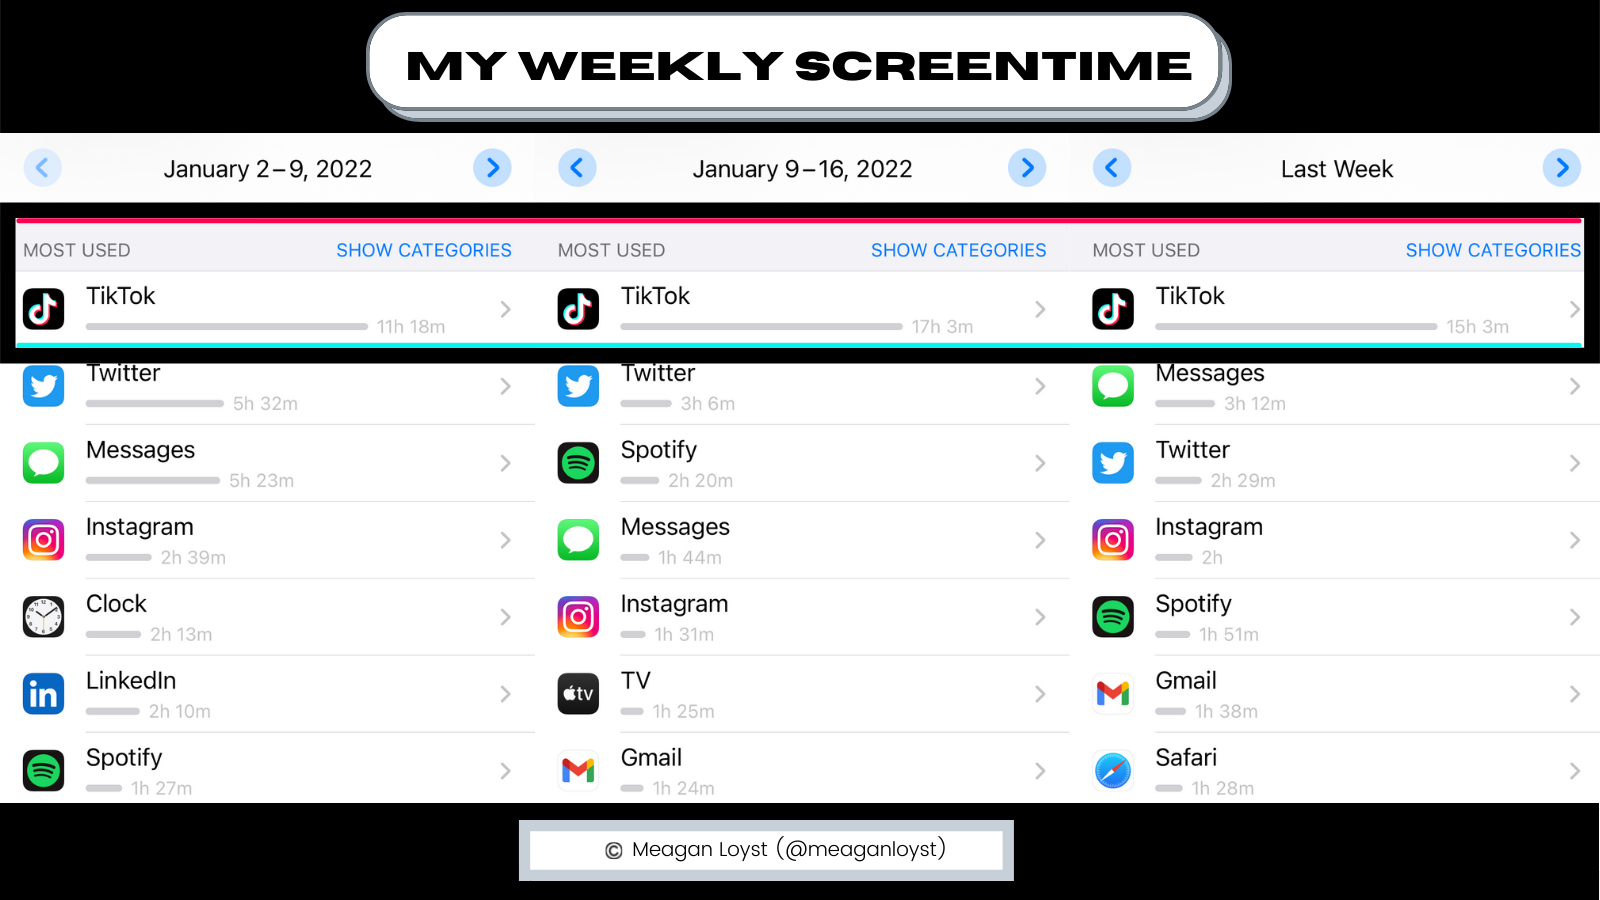 I average 14 hours a week on TikTok, which far surpasses time spent on any other app. 